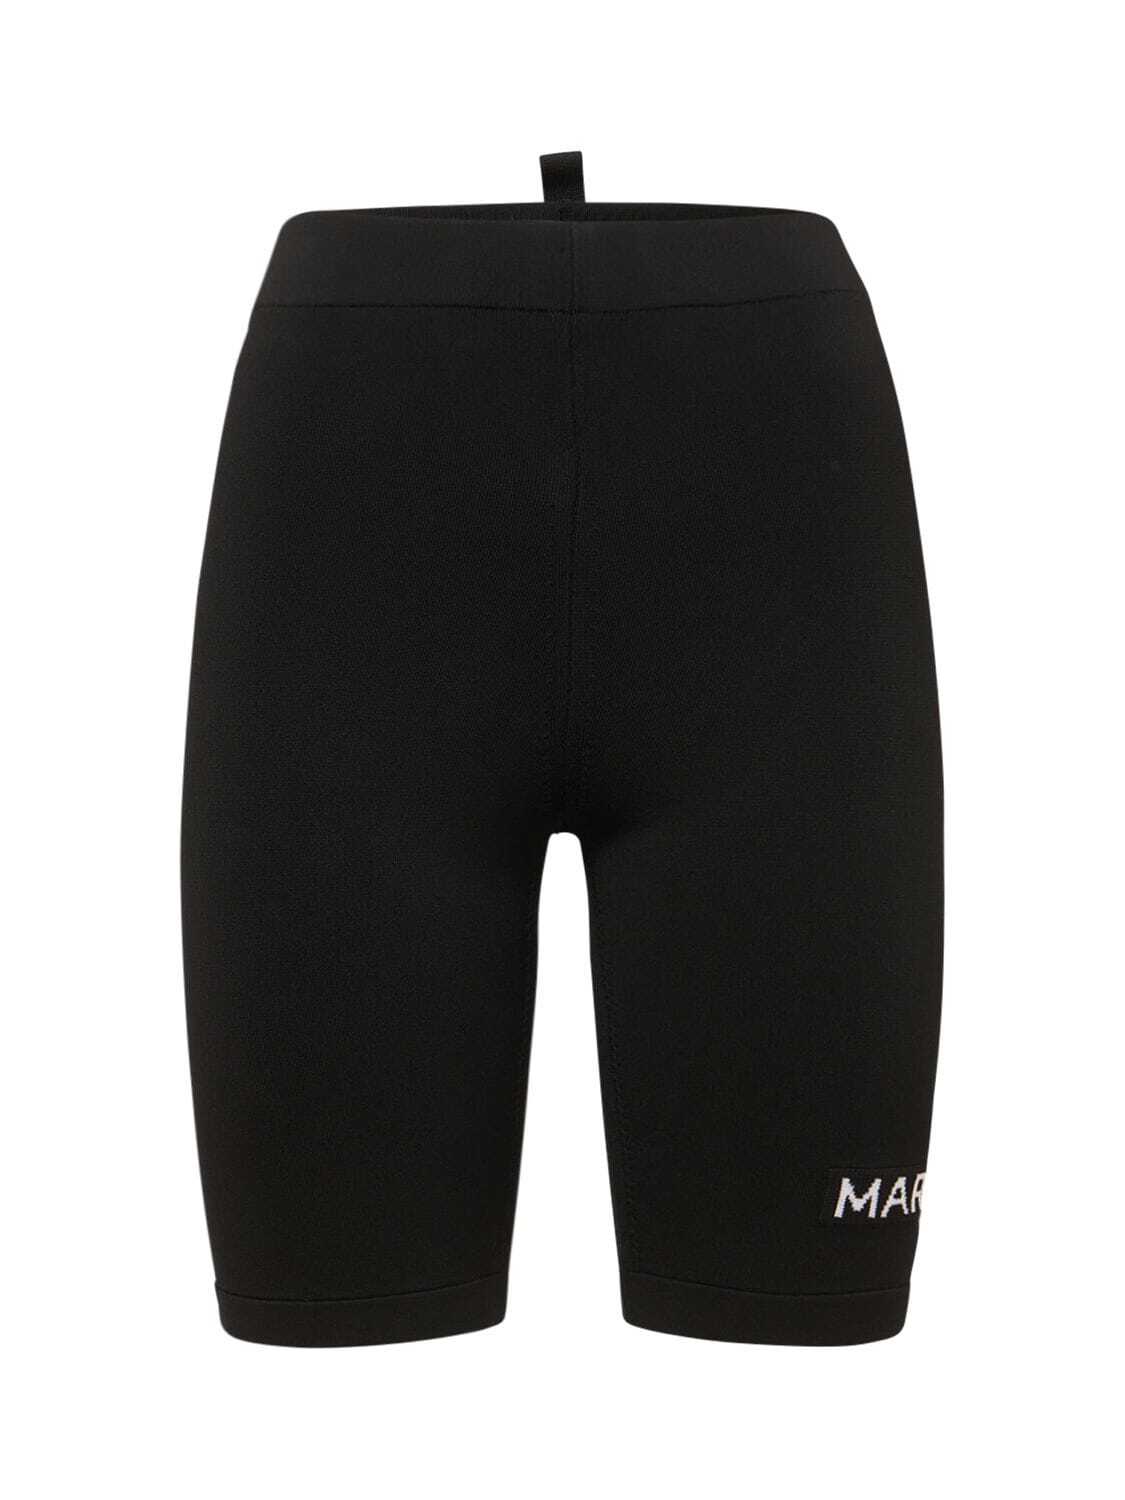 MARC JACOBS (THE) The Sport Viscose Blend Bike Shorts in black